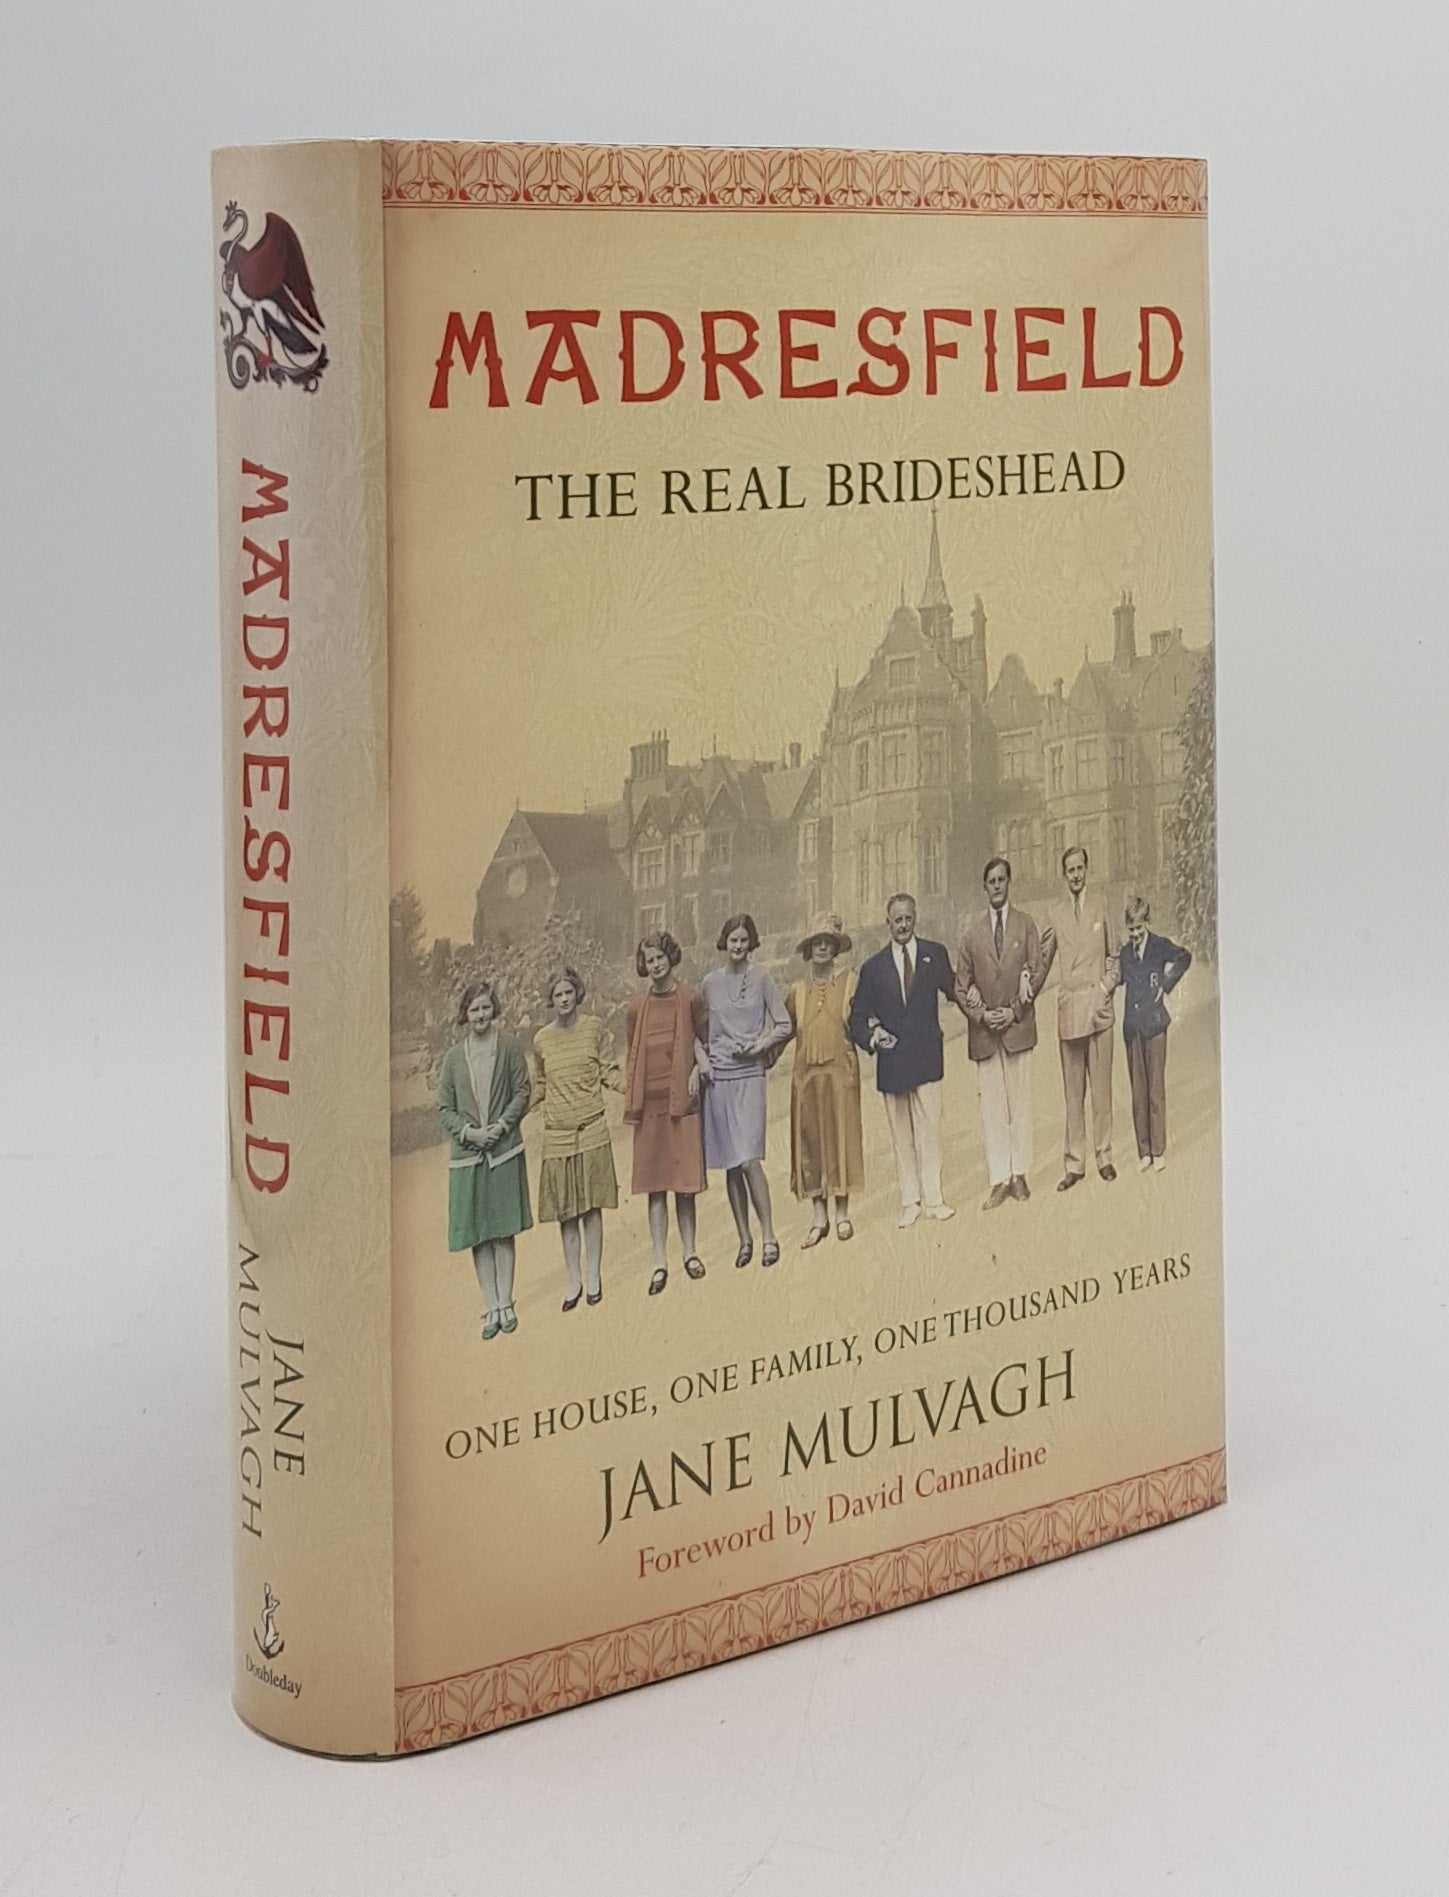 MULVAGH Jane - Madresfield One House One Family One Thousand Years